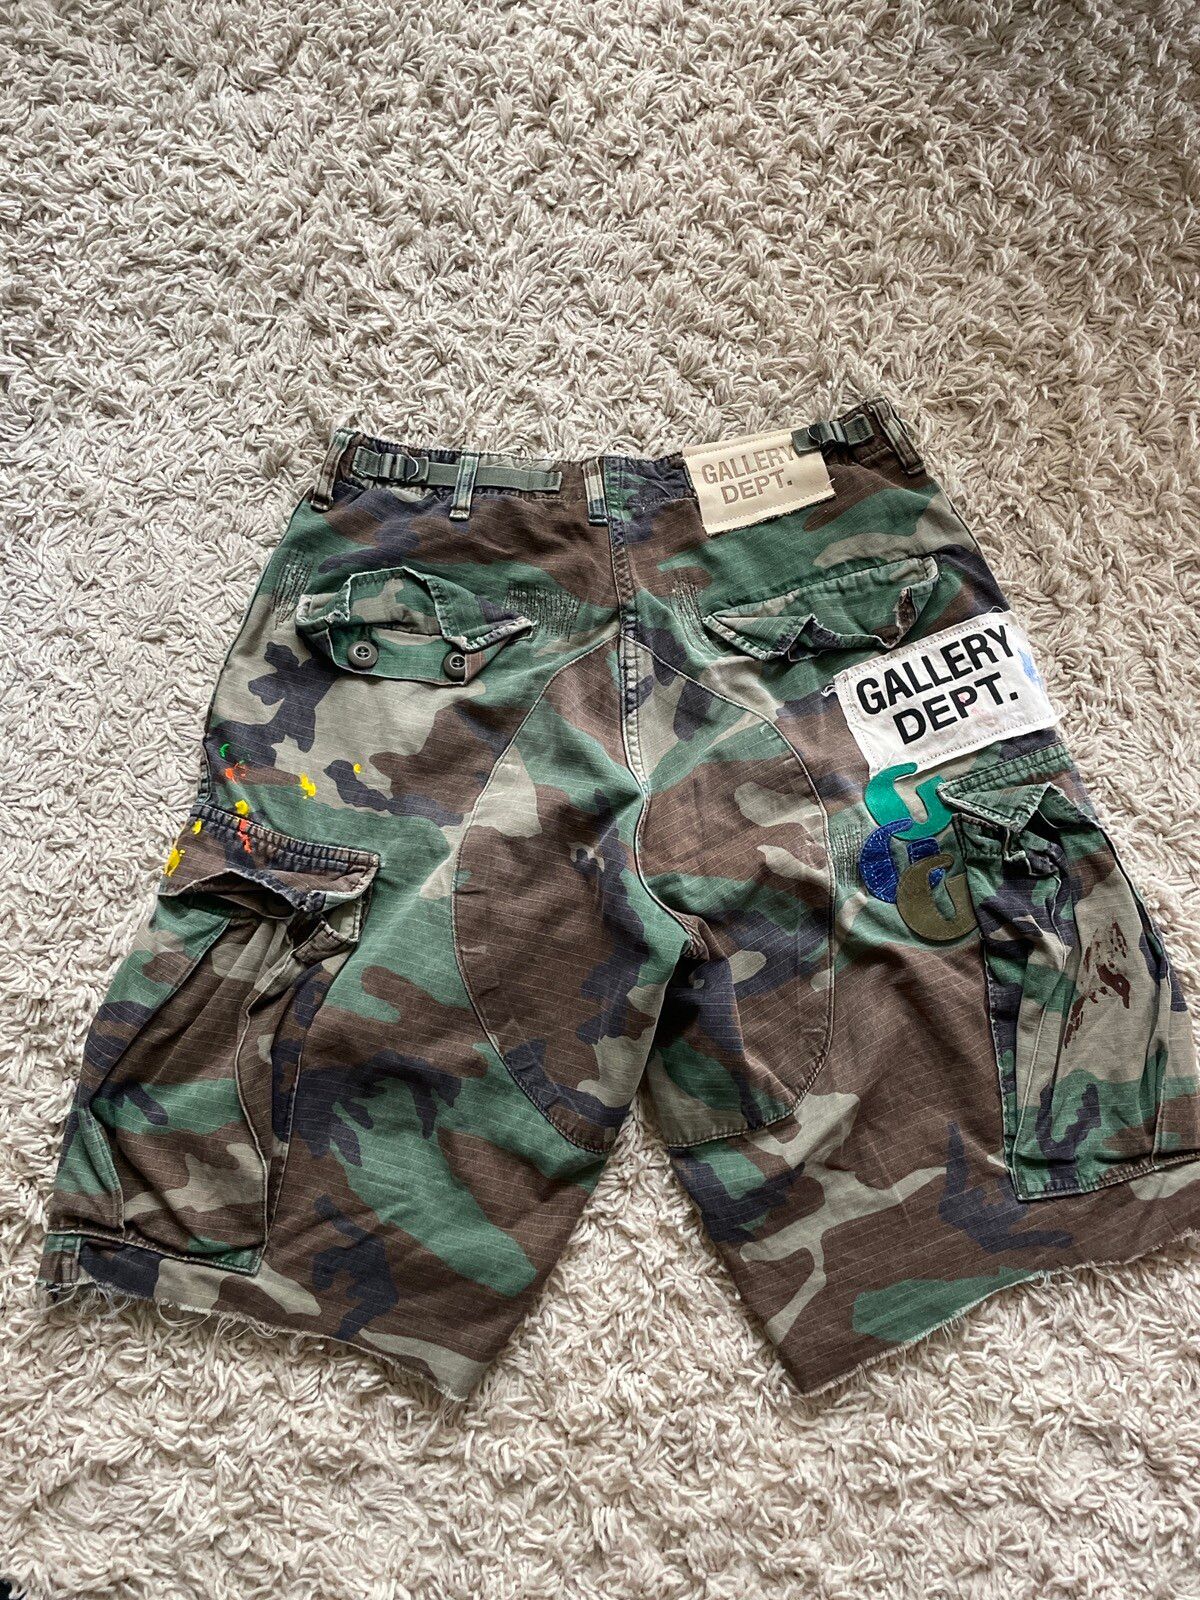 Gallery Dept. Gallery dept G patch camo cargo shorts Size US 29 - 2 Preview